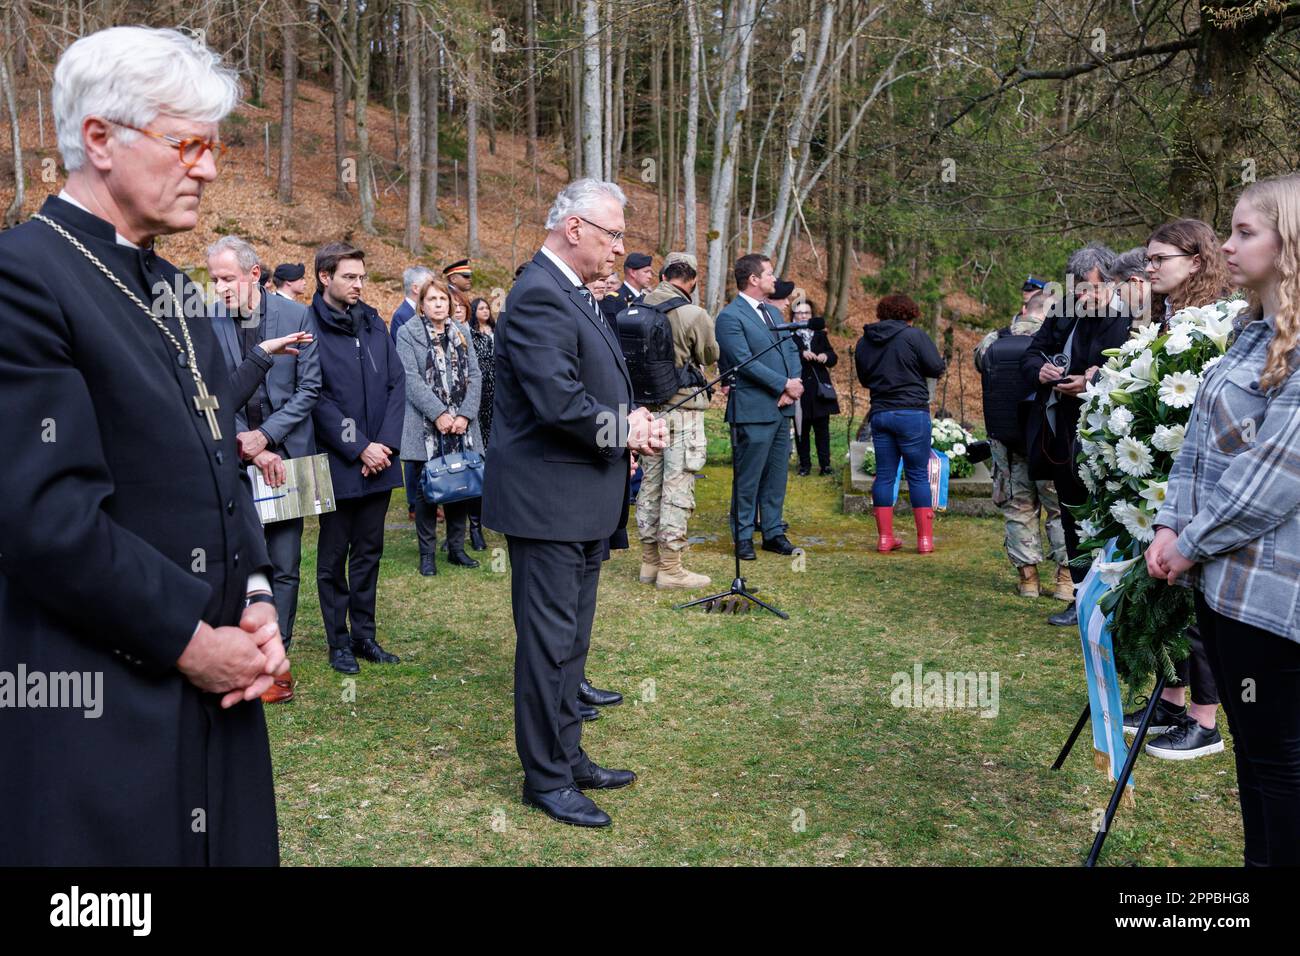 23 April 2023, Bavaria, Flossenbürg: Joachim Herrmann (M, CSU), Minister of the Interior of Bavaria, stands by a wreath in the so-called 'Valley of Death' in memory of the victims of the concentration camp during the commemoration of the 78th anniversary of the liberation of the Flossenbürg concentration camp. On the left is Heinrich Bedford-Strohm, regional bishop of the Evangelical Lutheran Church in Bavaria. Flossenbürg concentration camp had been liberated by the U.S. Army on April 23, 1945. Of about 100,000 people imprisoned there or in the subcamps, about 30,000 had died. Photo: Daniel K Stock Photo